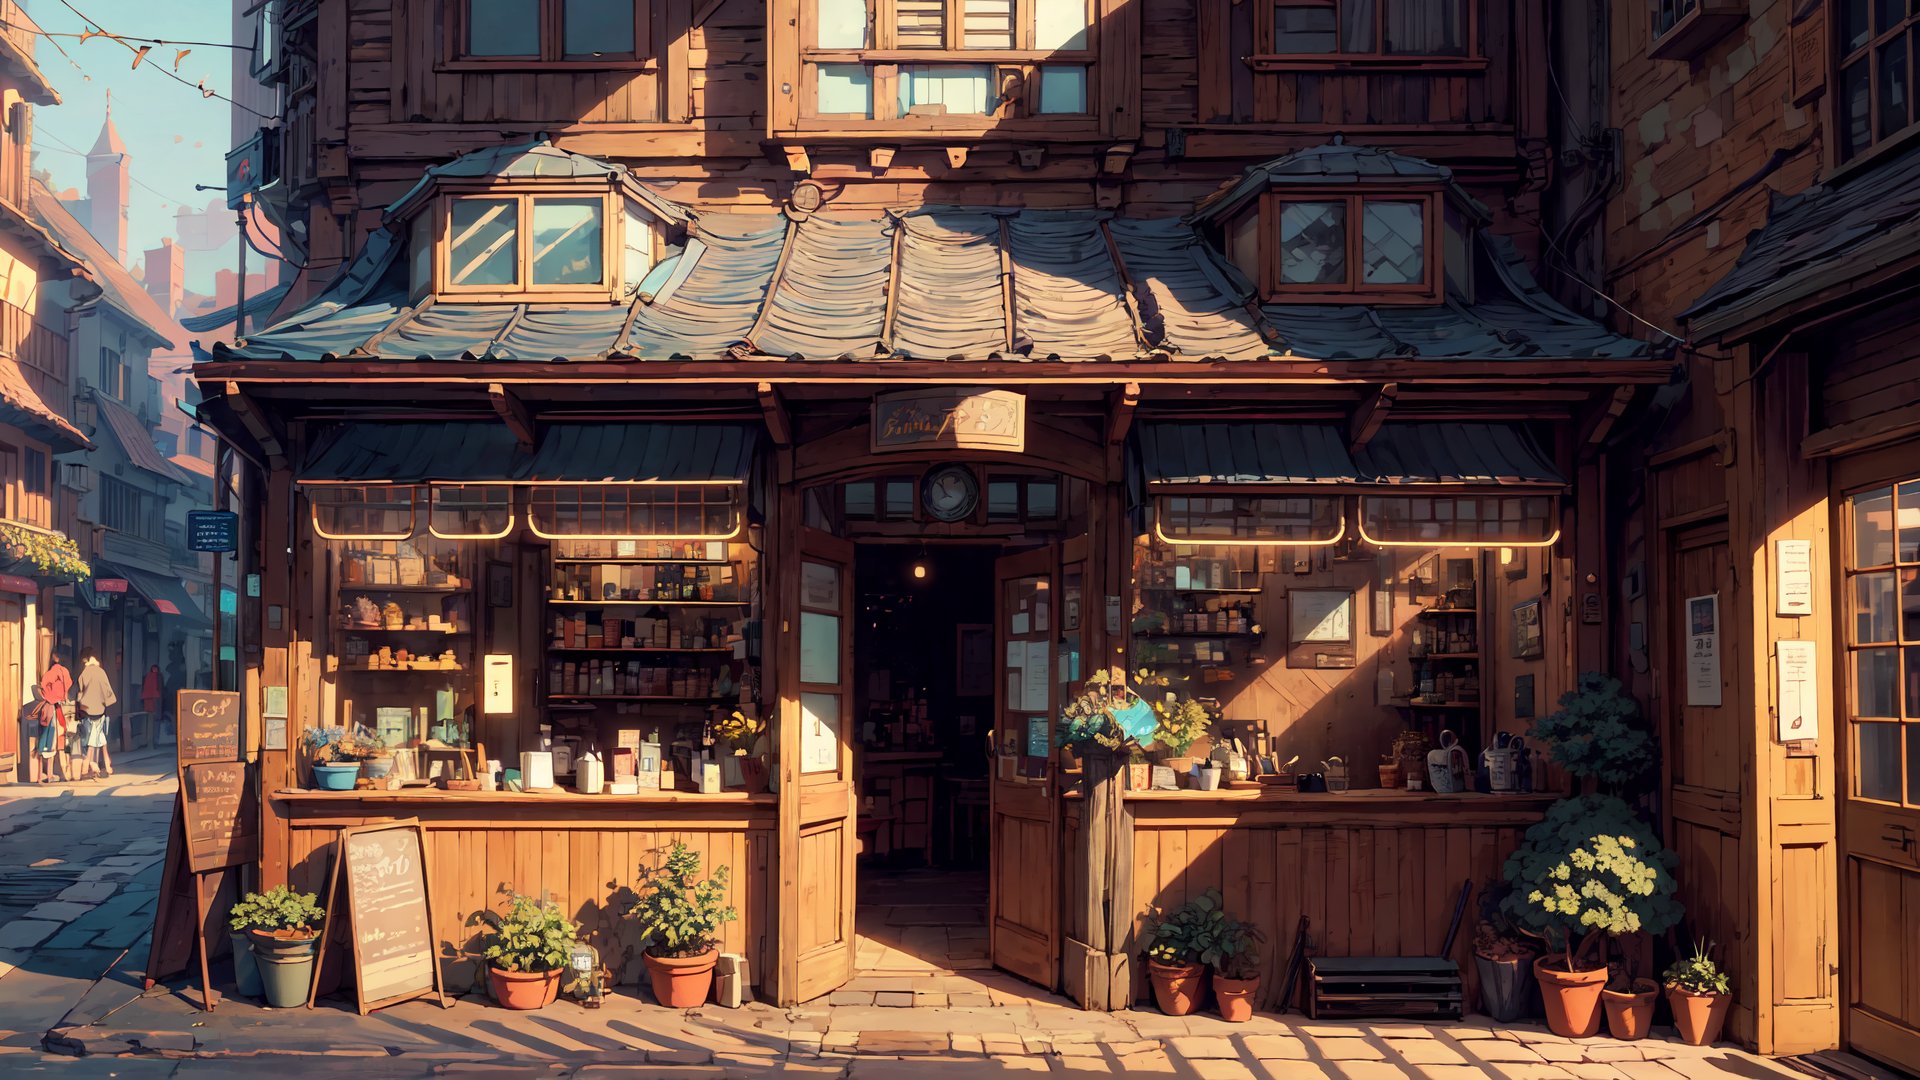 masterpiece, best quality,small cafe, medieval era, from inside view, viewer looking outside the glass, detail interior,beautiful street, detail perspective, 2 point perspective, day time, local shops, Studio Ghibli, Makoto Shinkai anime style